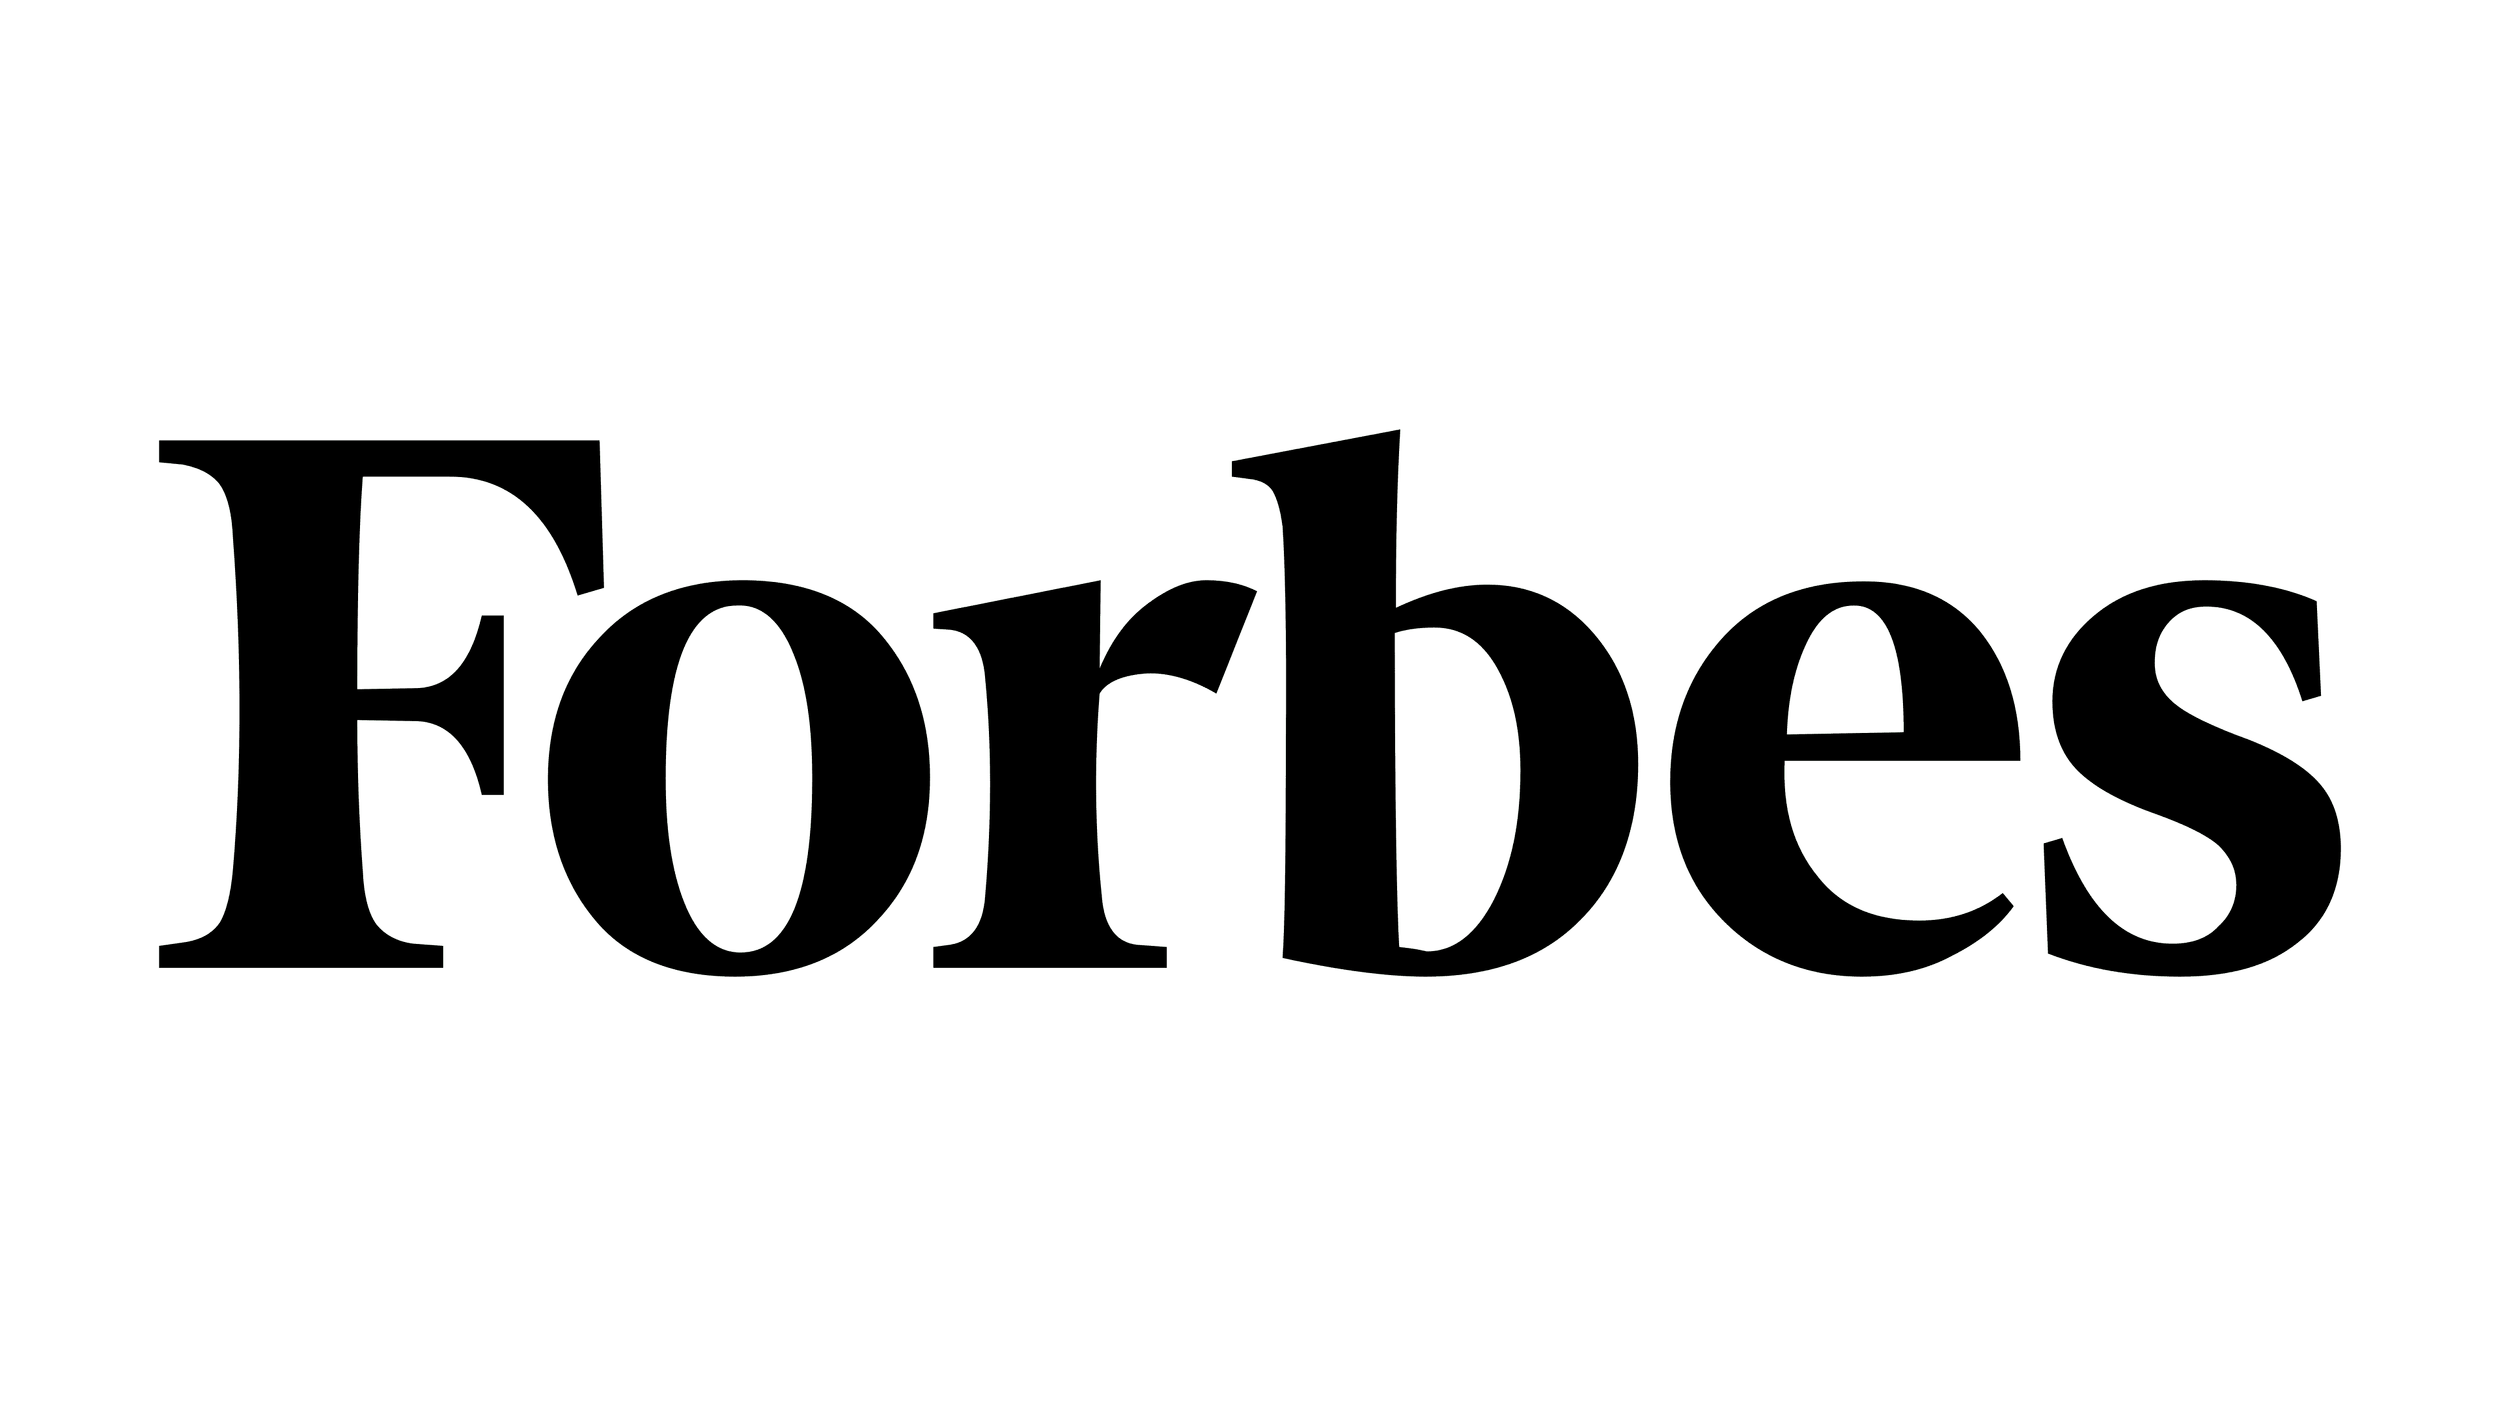 Forbes-logo-1.png